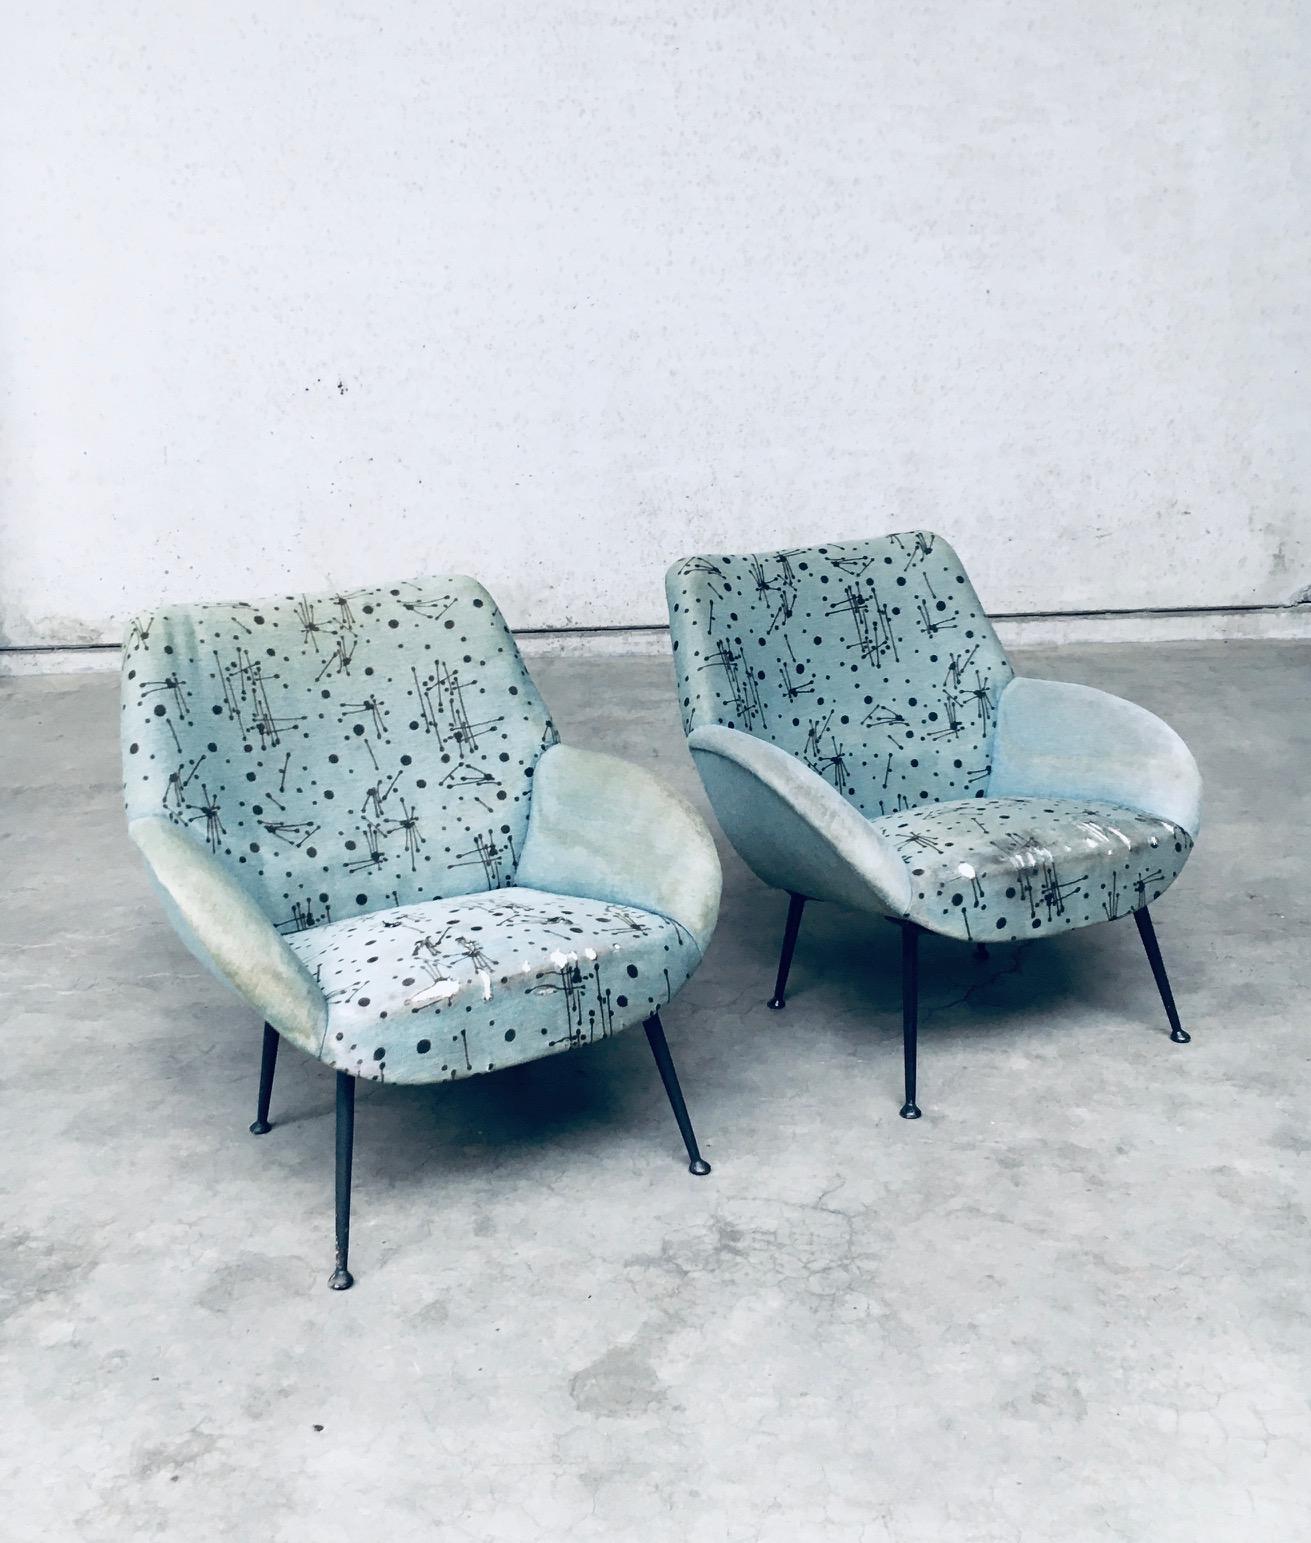 Vintage Midcentury Modern Dutch Design Model 121 Lounge Chair set of 2 by Theo Ruth for Artifort. Made in The Netherlands, 1956. All original set of arm chairs with original 'Atomic' 'Space Age' fabric on both chairs. Cast metal tapered legs with